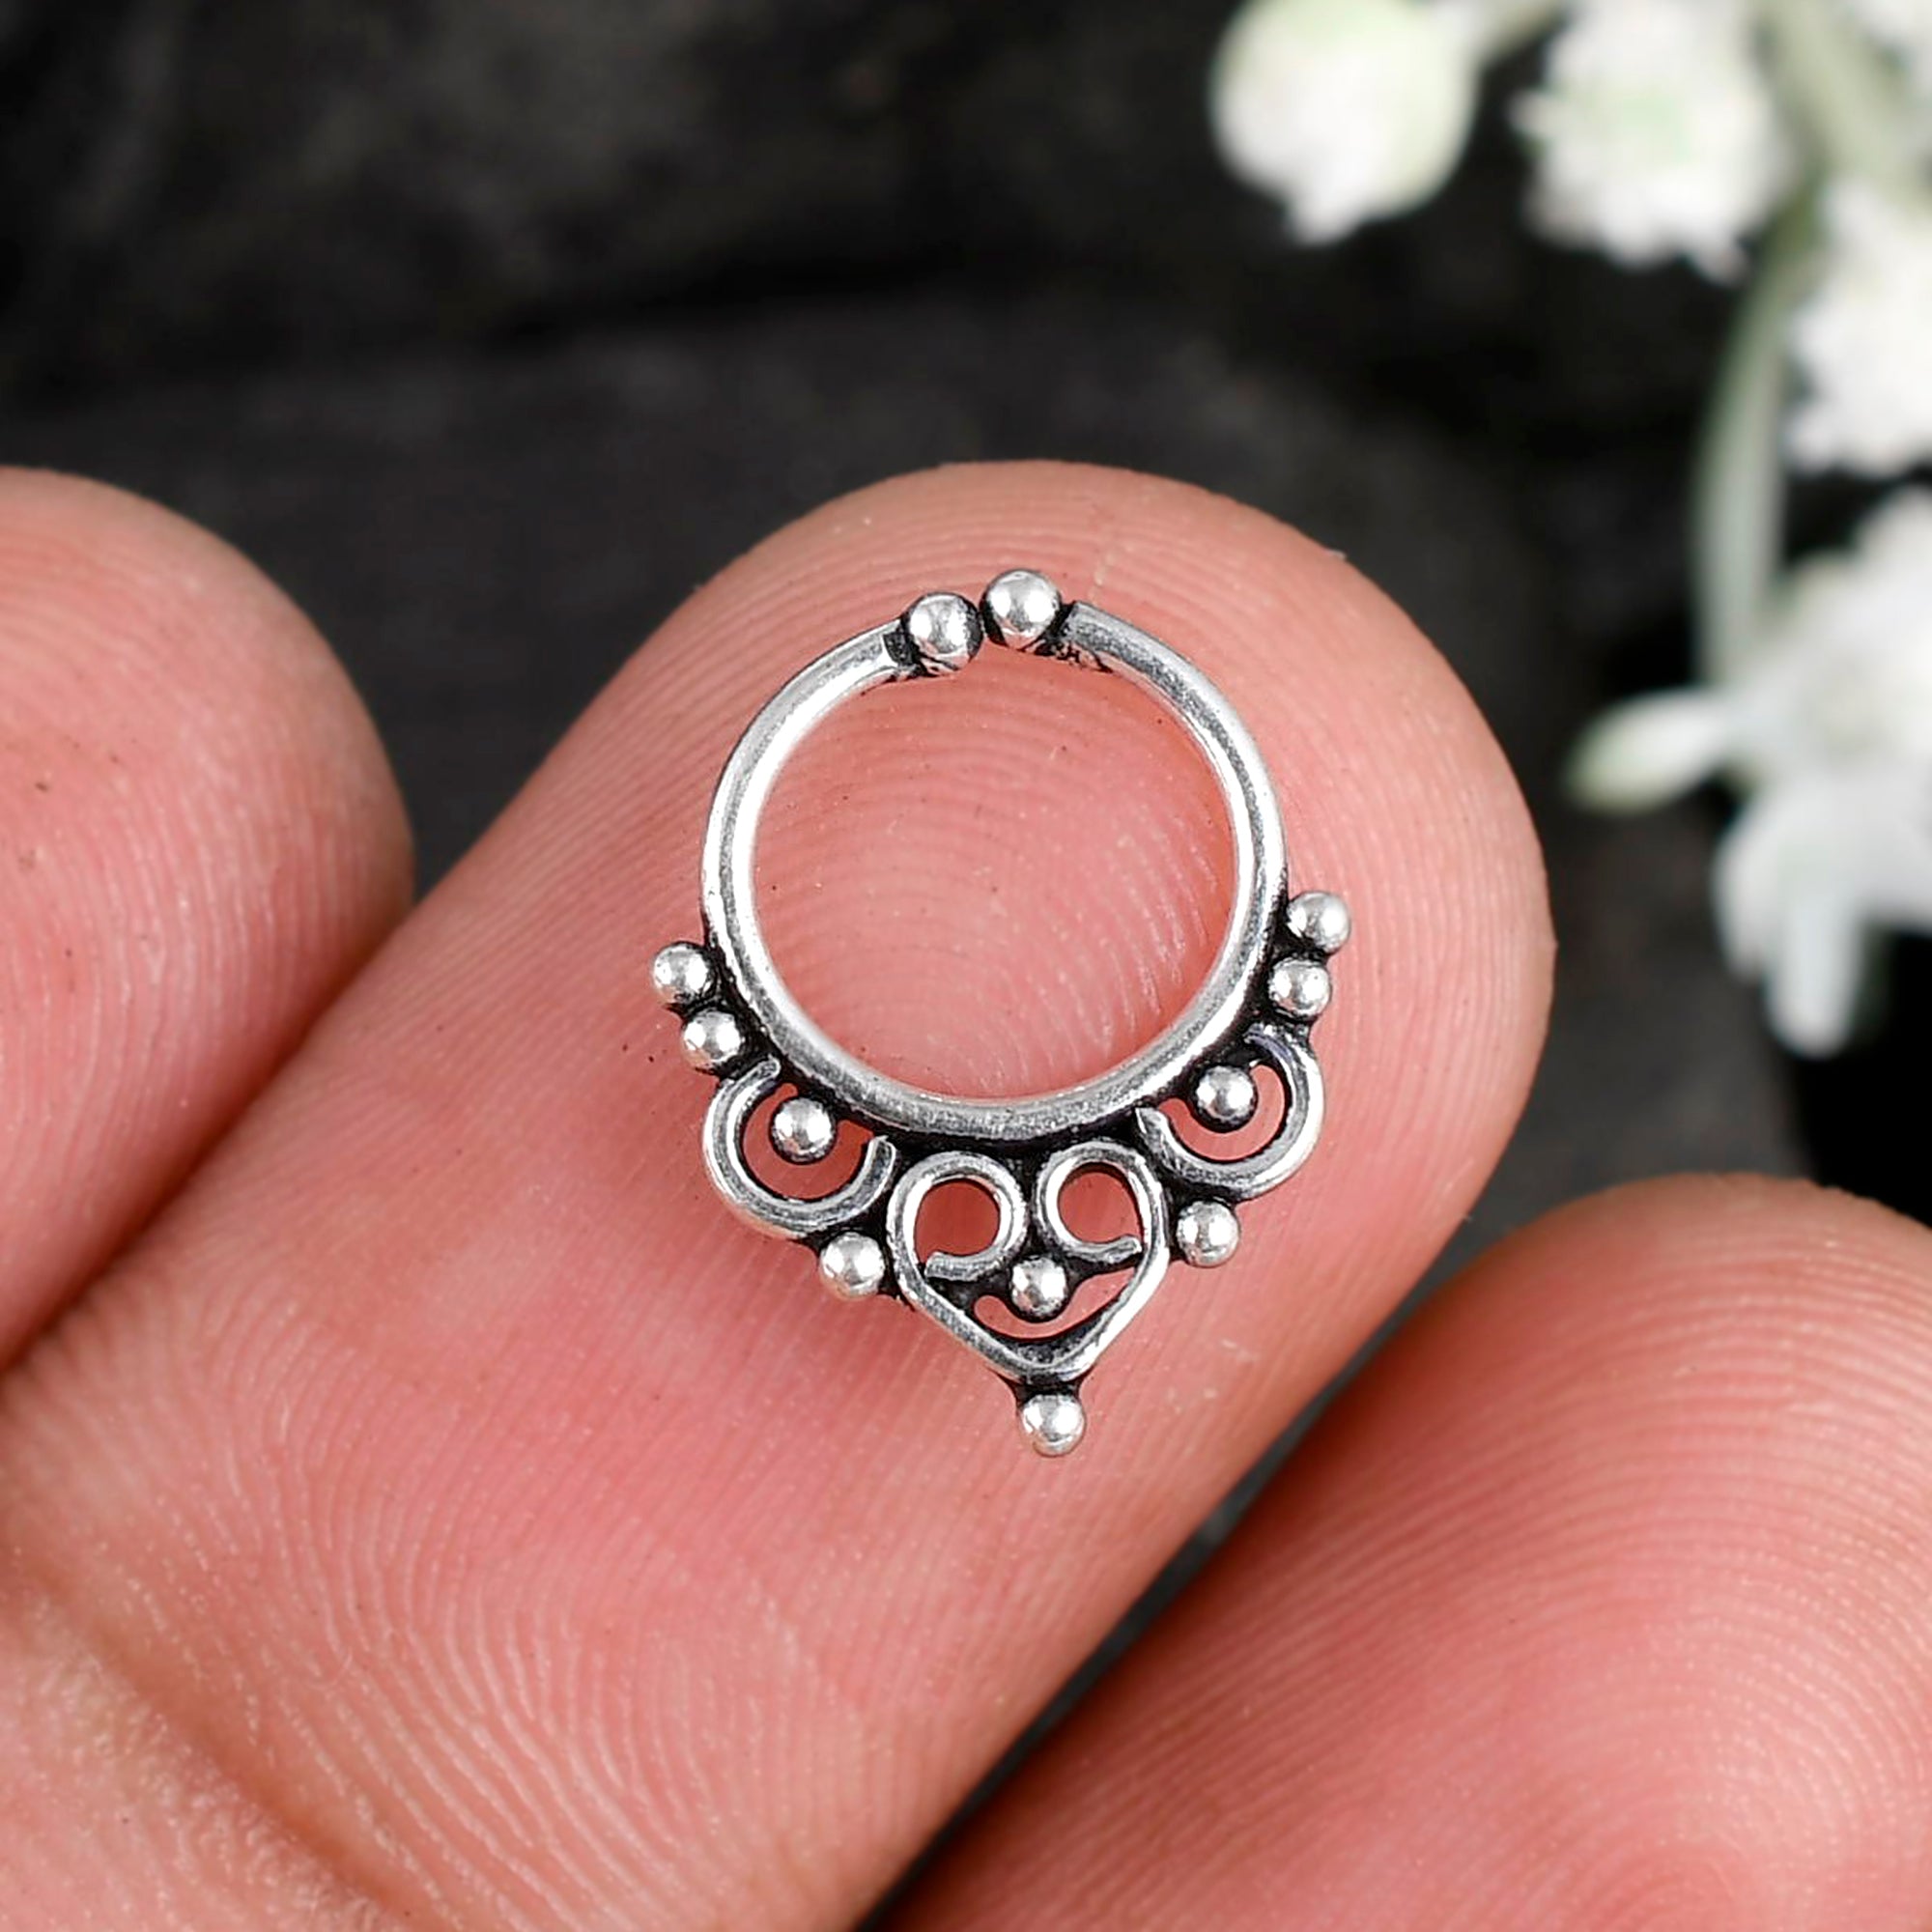 Buy Silver Septum Ring, Indian Septum Ring, Tribal Septum Ring, Septum  Piercing, Septum Jewelry Online in India - Etsy